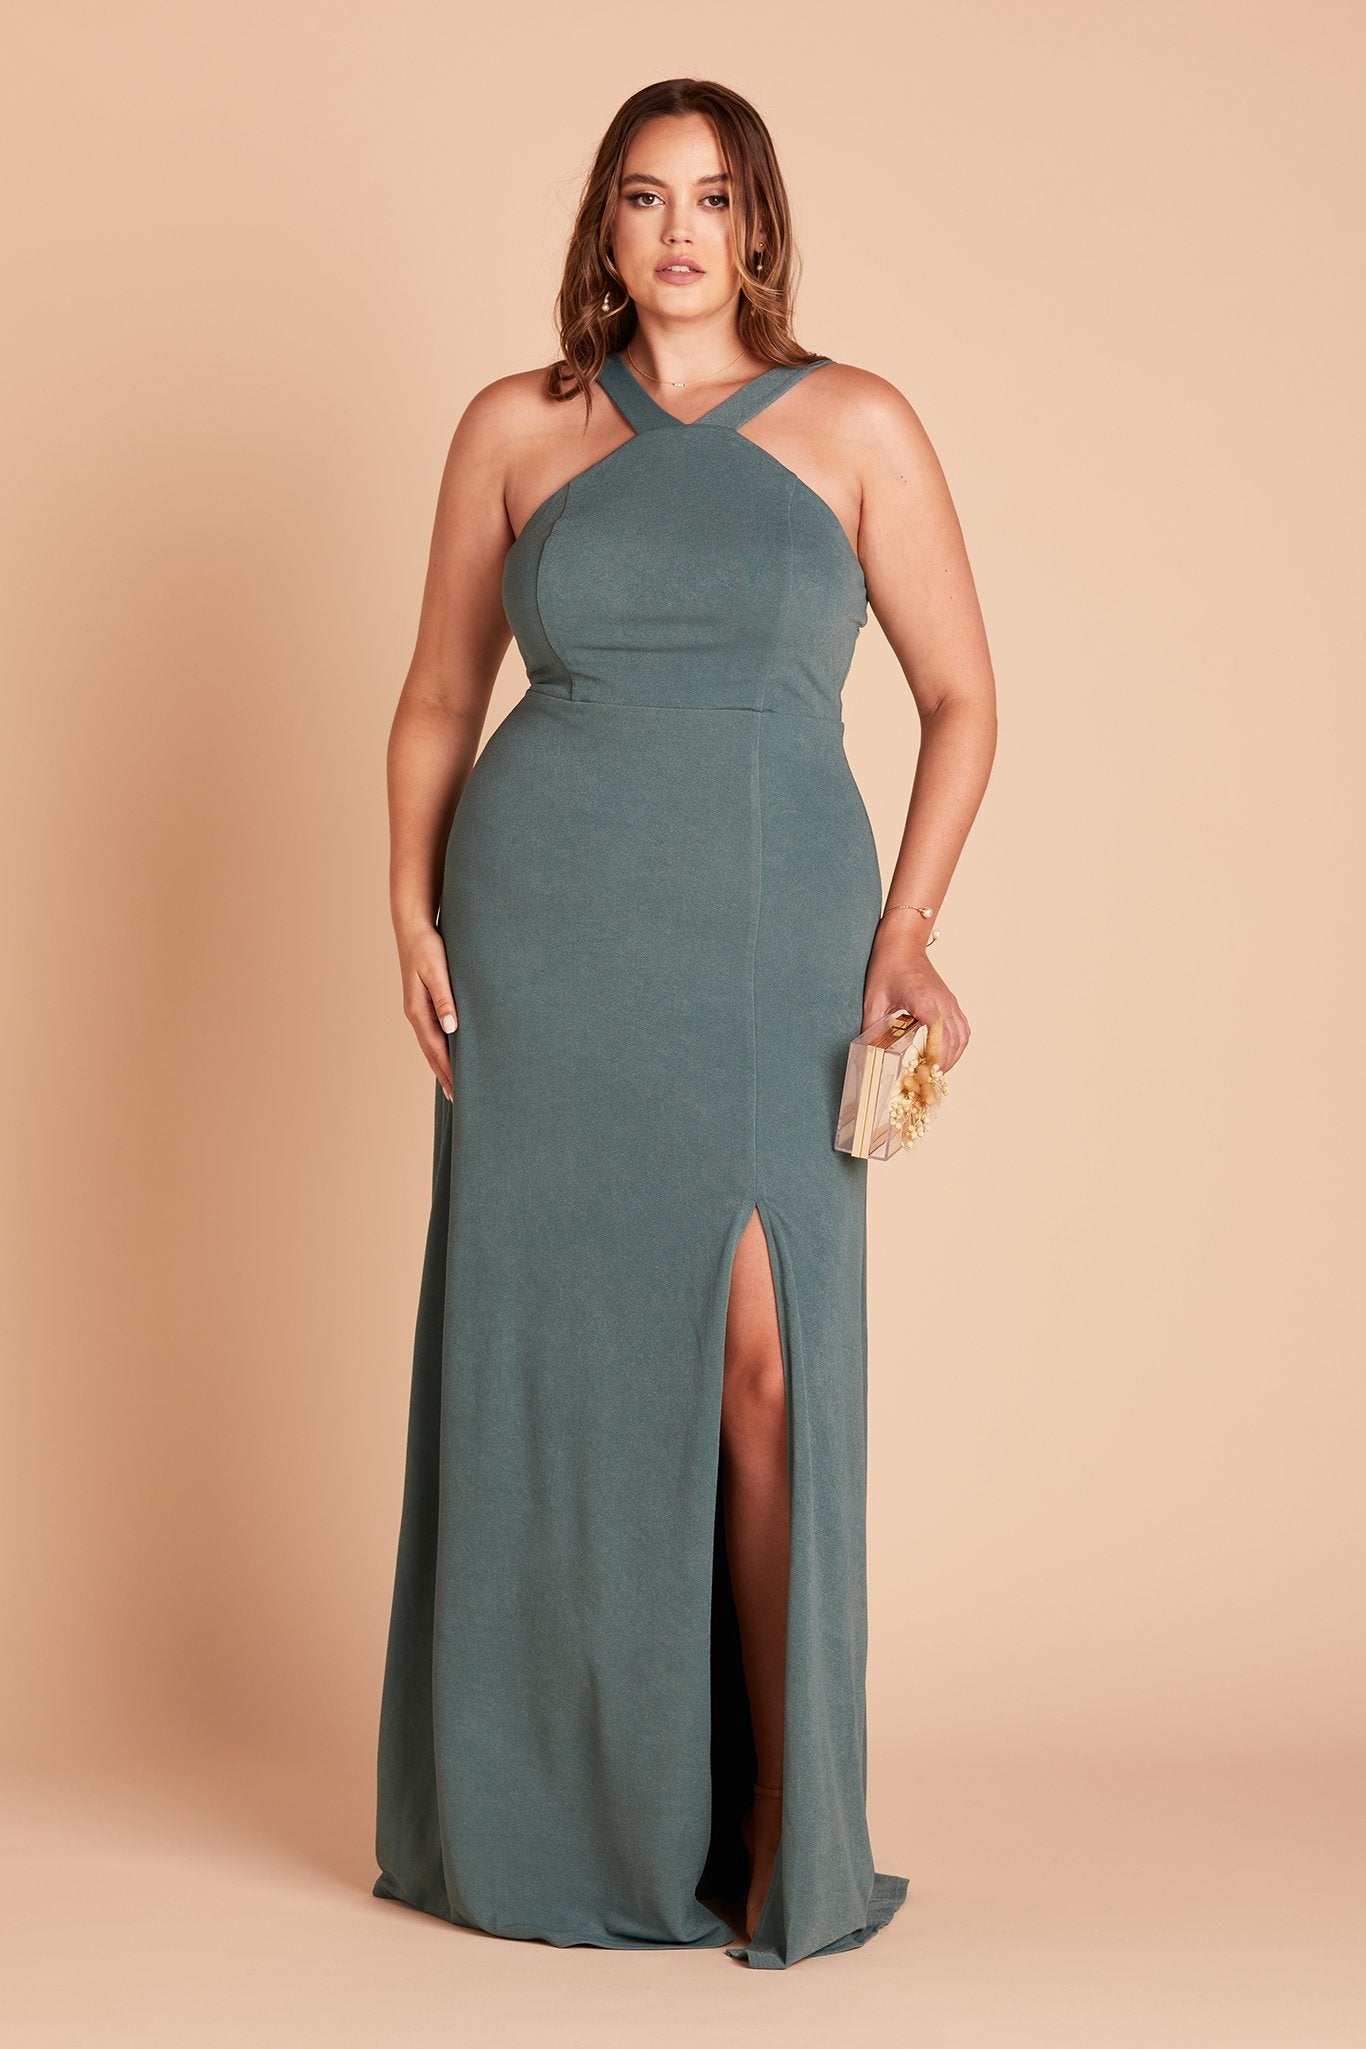 Gene plus size bridesmaid dress with slit in sea glass green crepe by Birdy Grey, front view